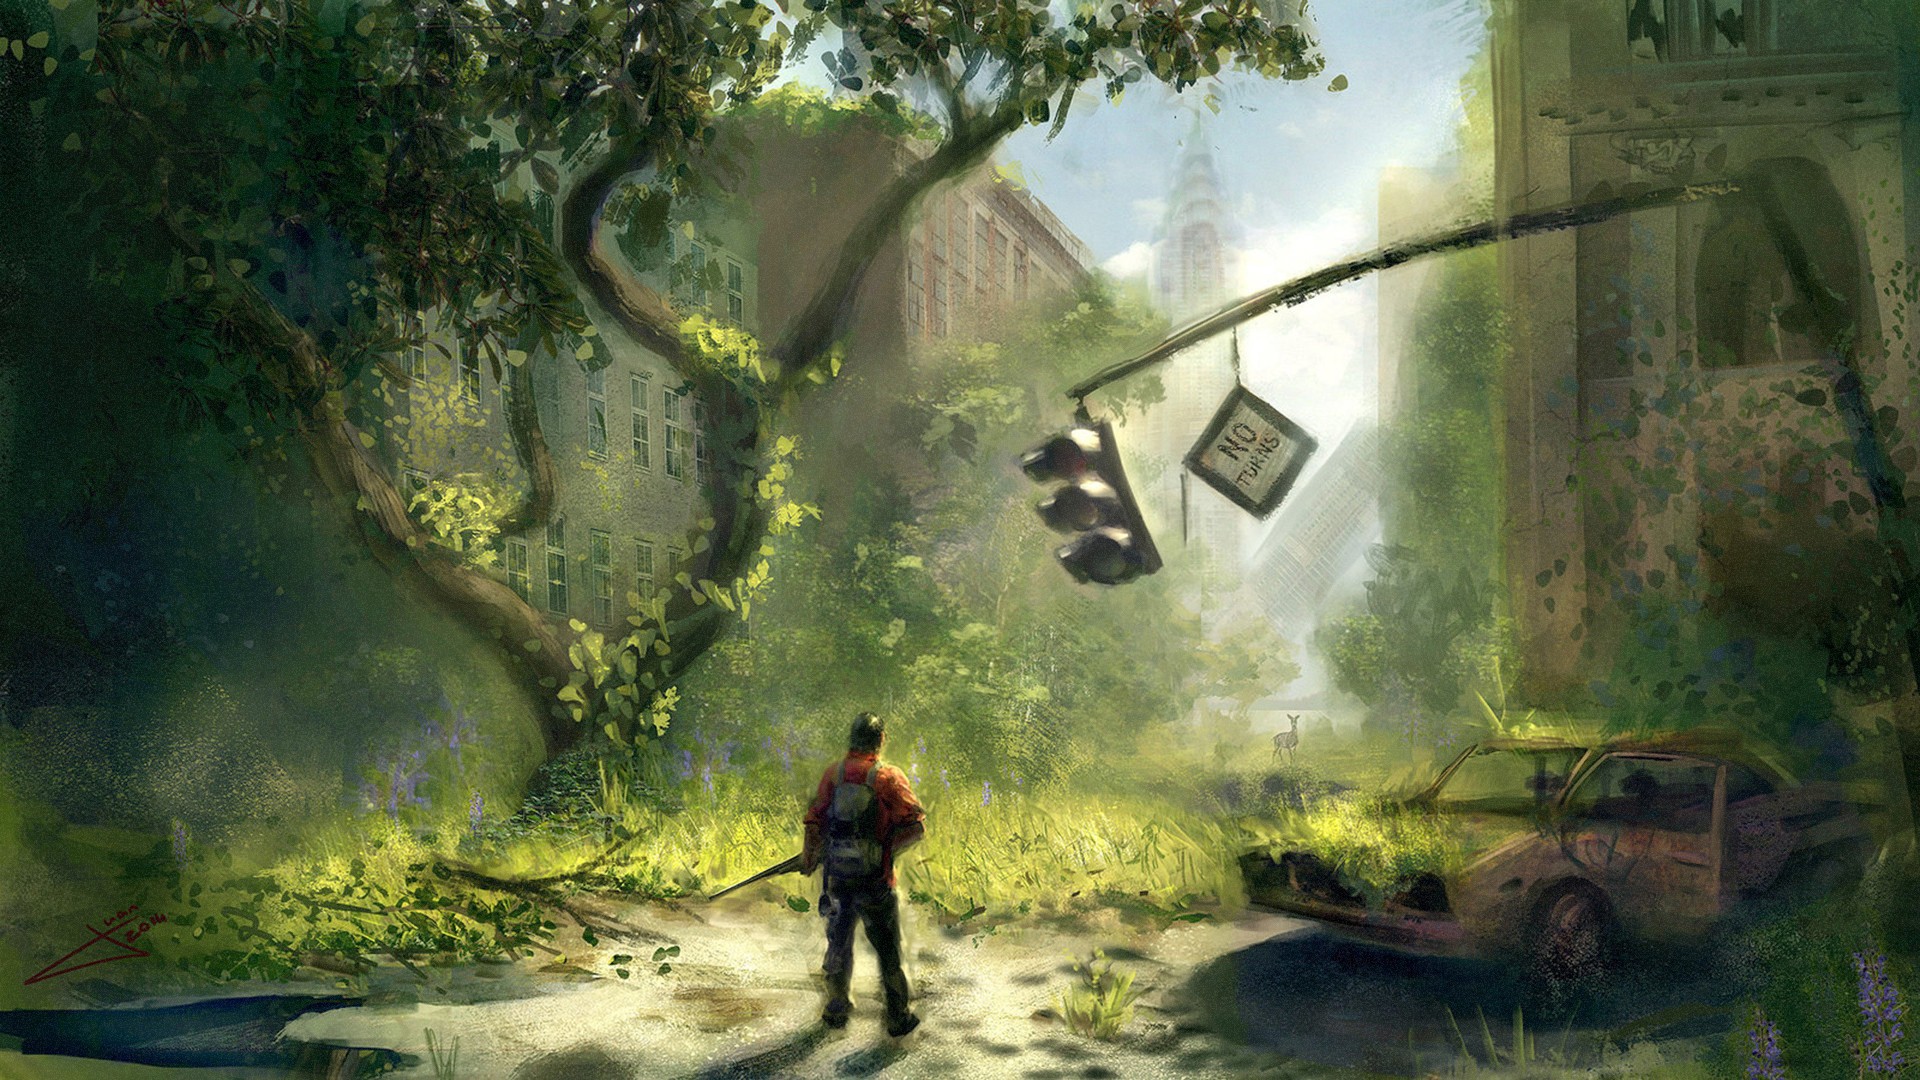 artwork, Apocalyptic, The Last of Us, Science fiction, Video games Wallpaper